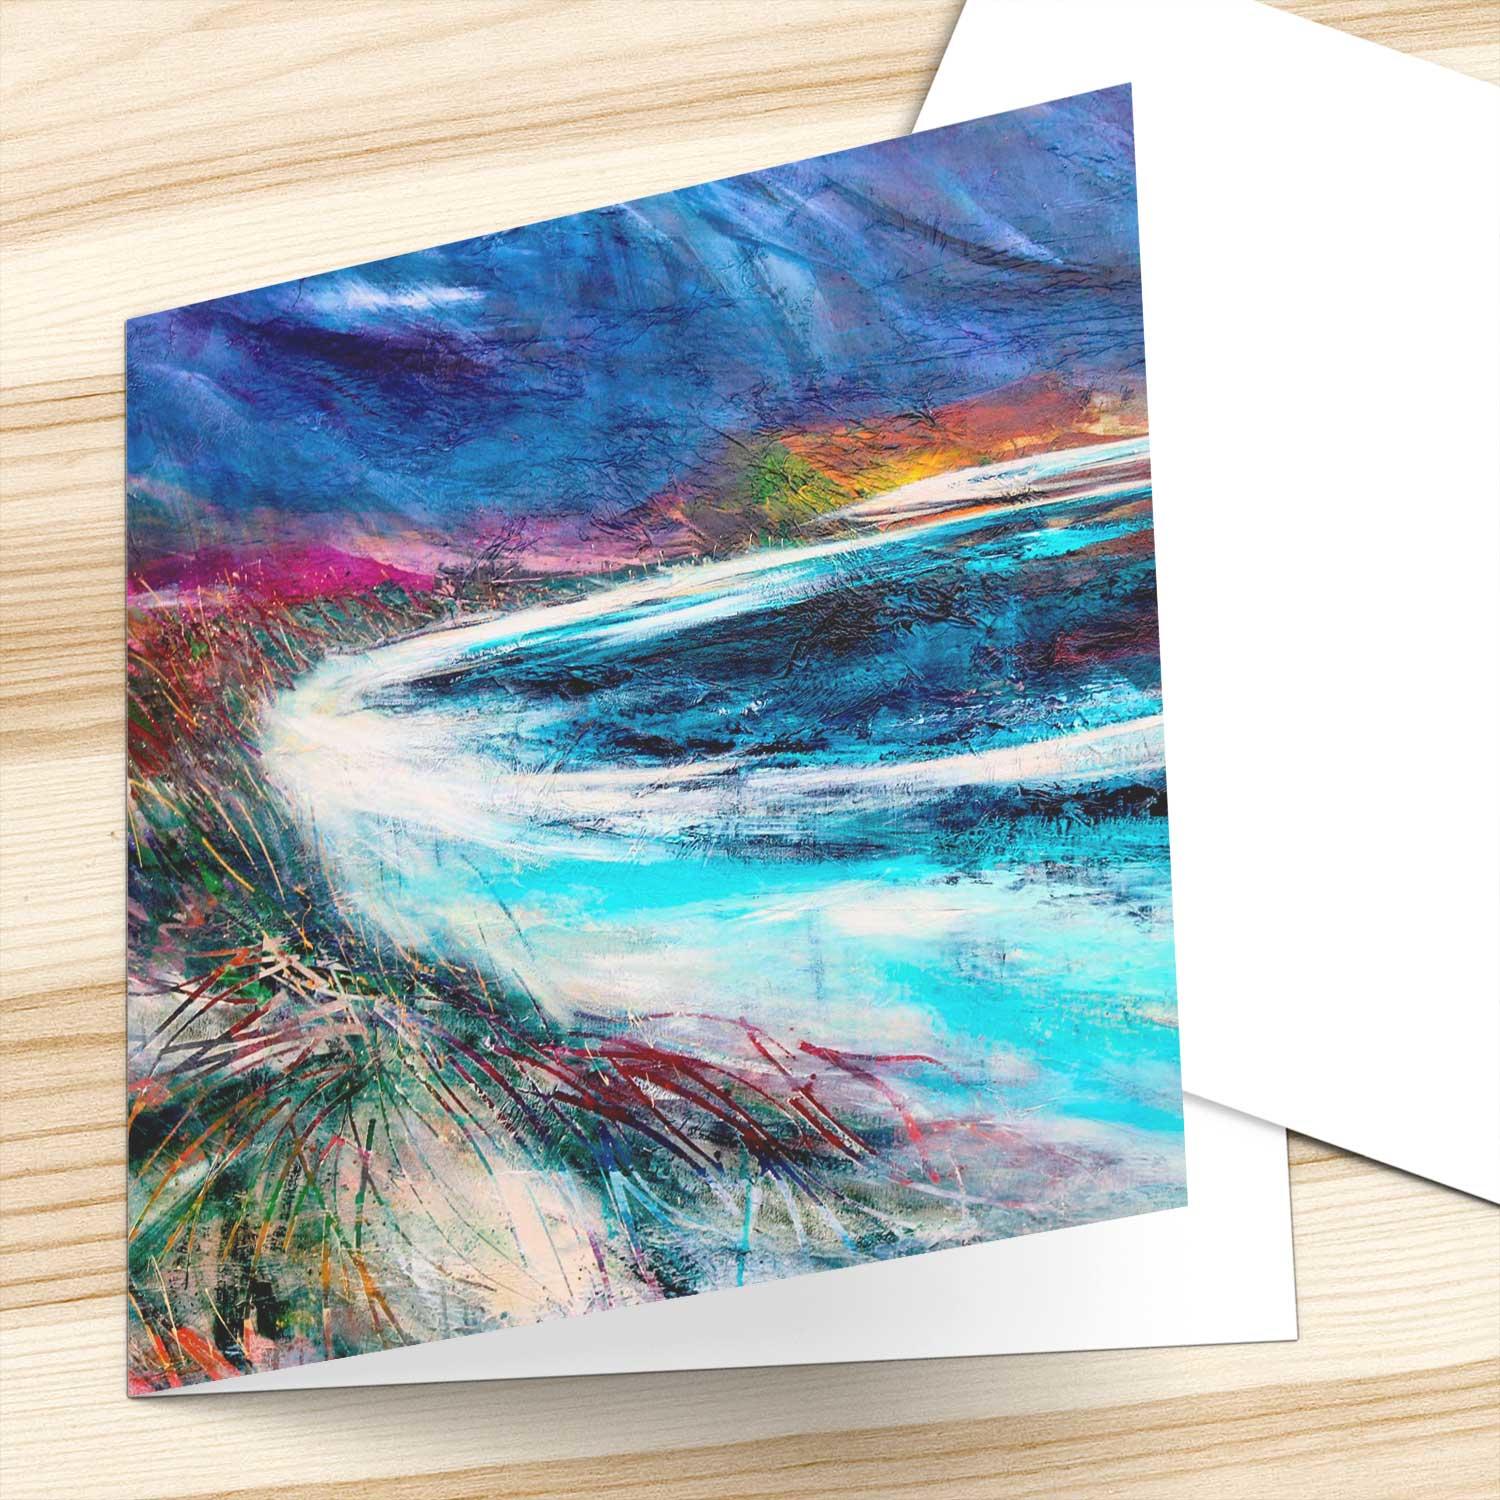 Purple Hills Greeting Card from an original painting by artist Fiona Matheson